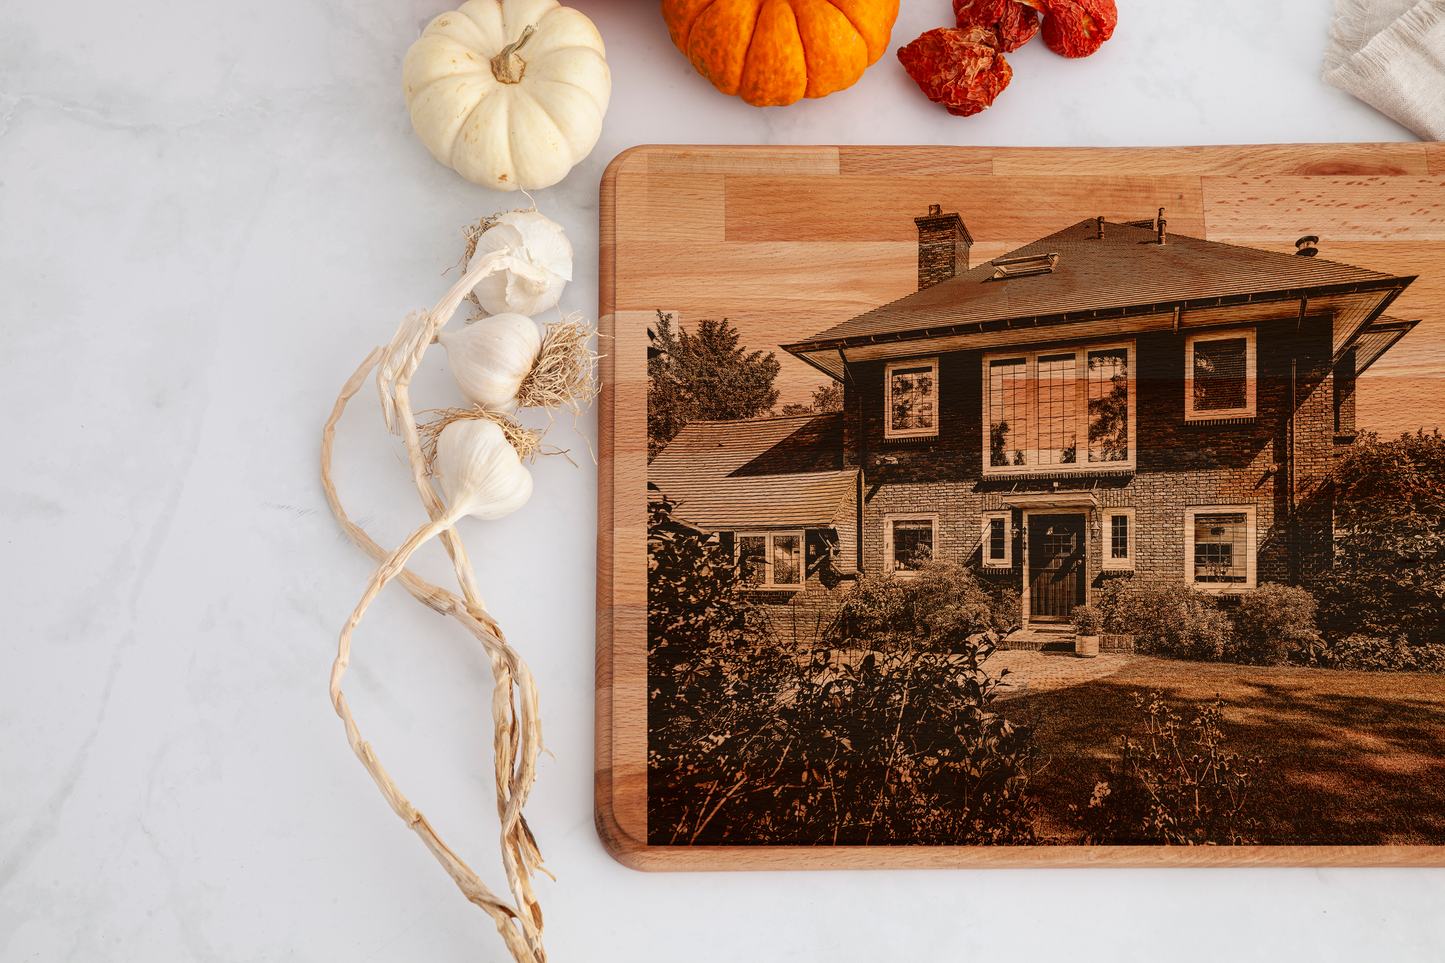 Personalize Your Kitchen and Celebrate Special Occasions with a Custom Beech Wood Cutting Board from Woody Buddy